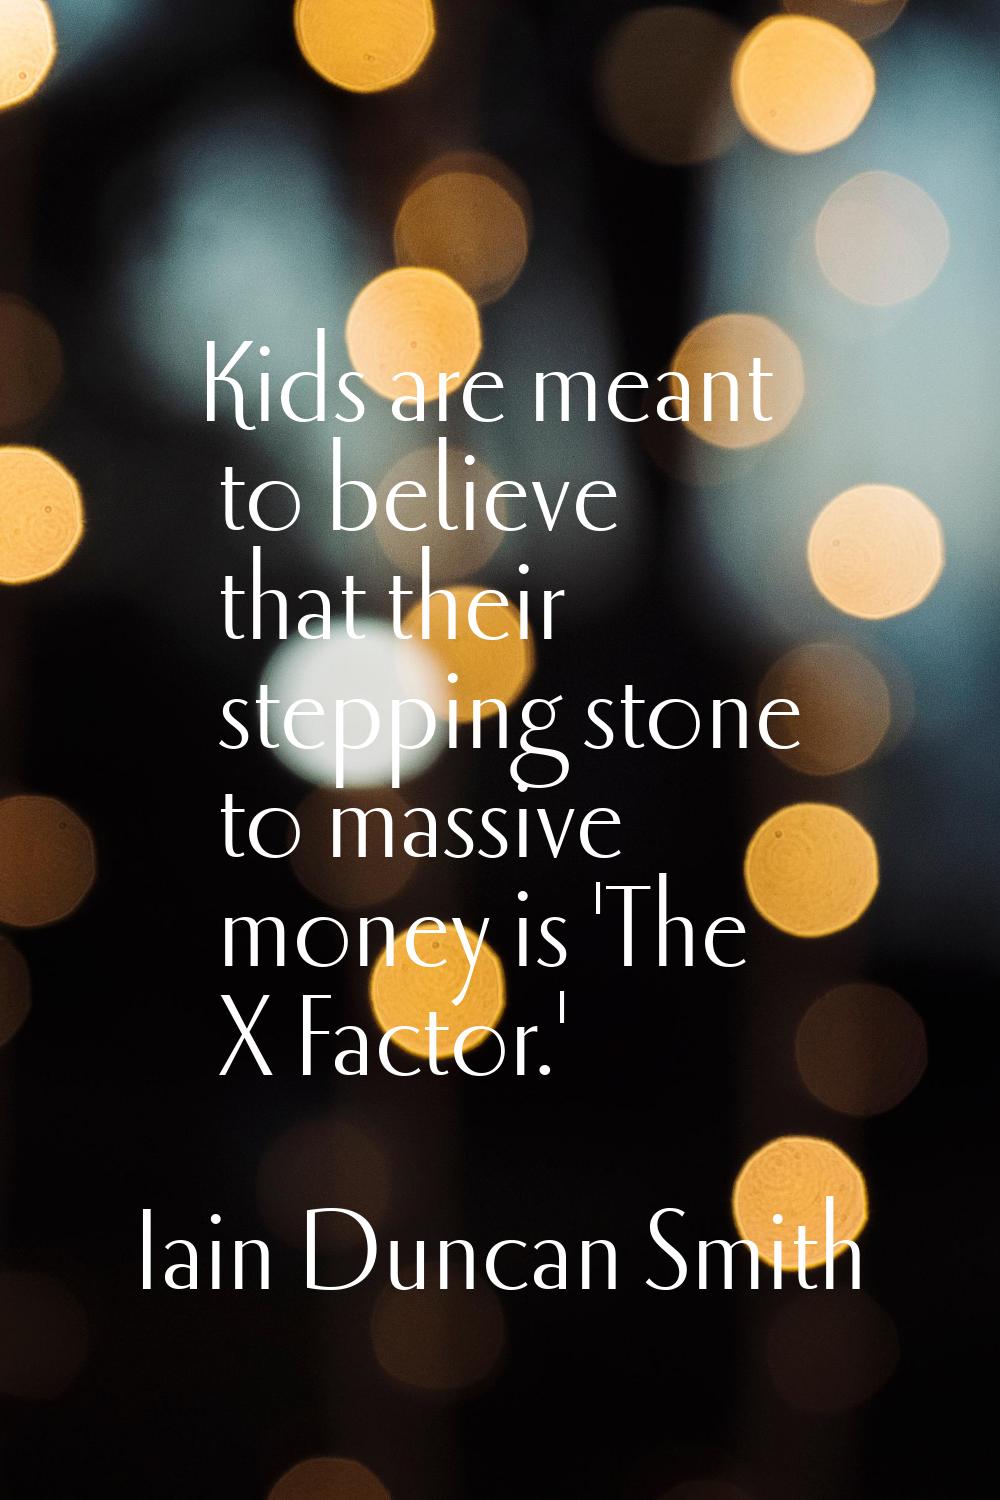 Kids are meant to believe that their stepping stone to massive money is 'The X Factor.'